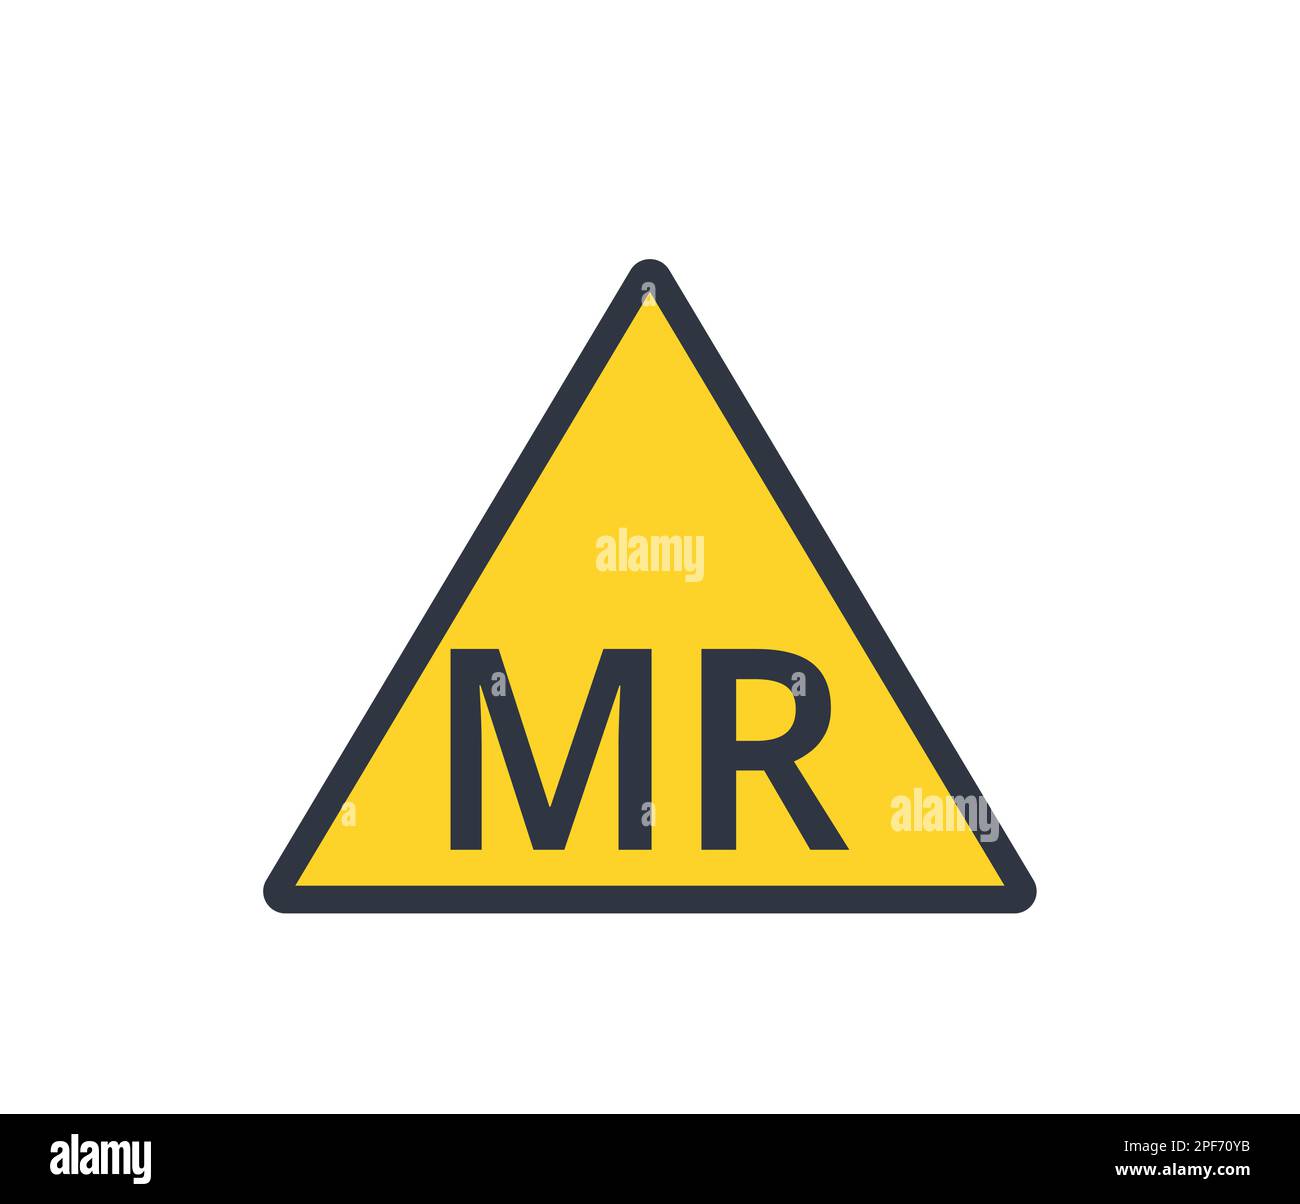 MR conditional symbol. Graphical Symbols for Medical devices. Stock Vector